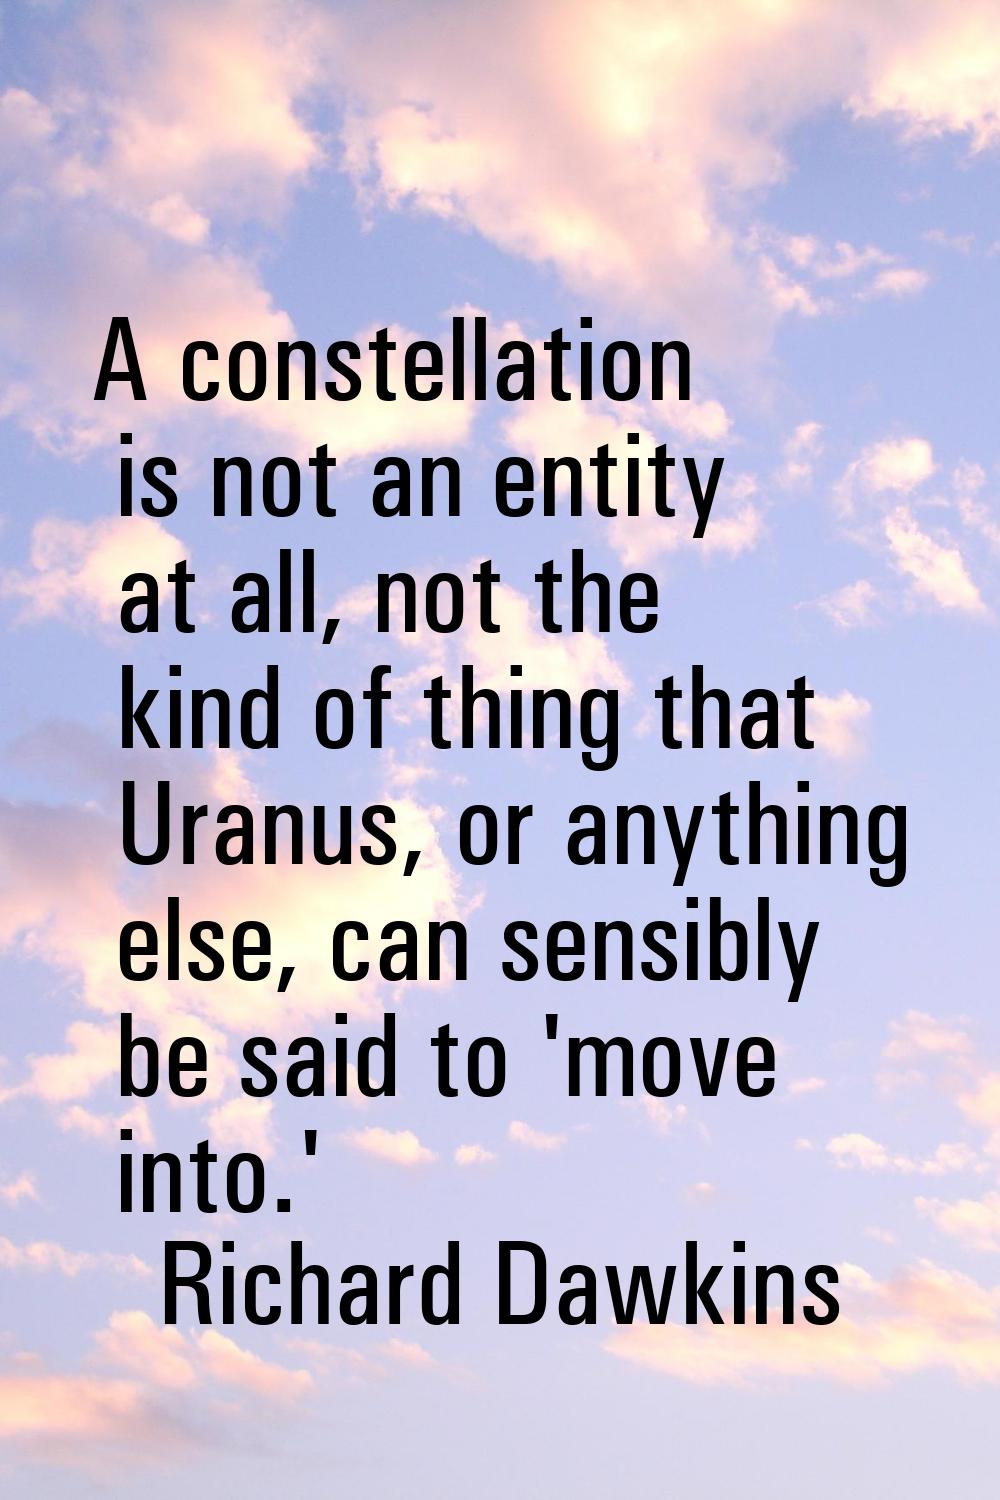 A constellation is not an entity at all, not the kind of thing that Uranus, or anything else, can s